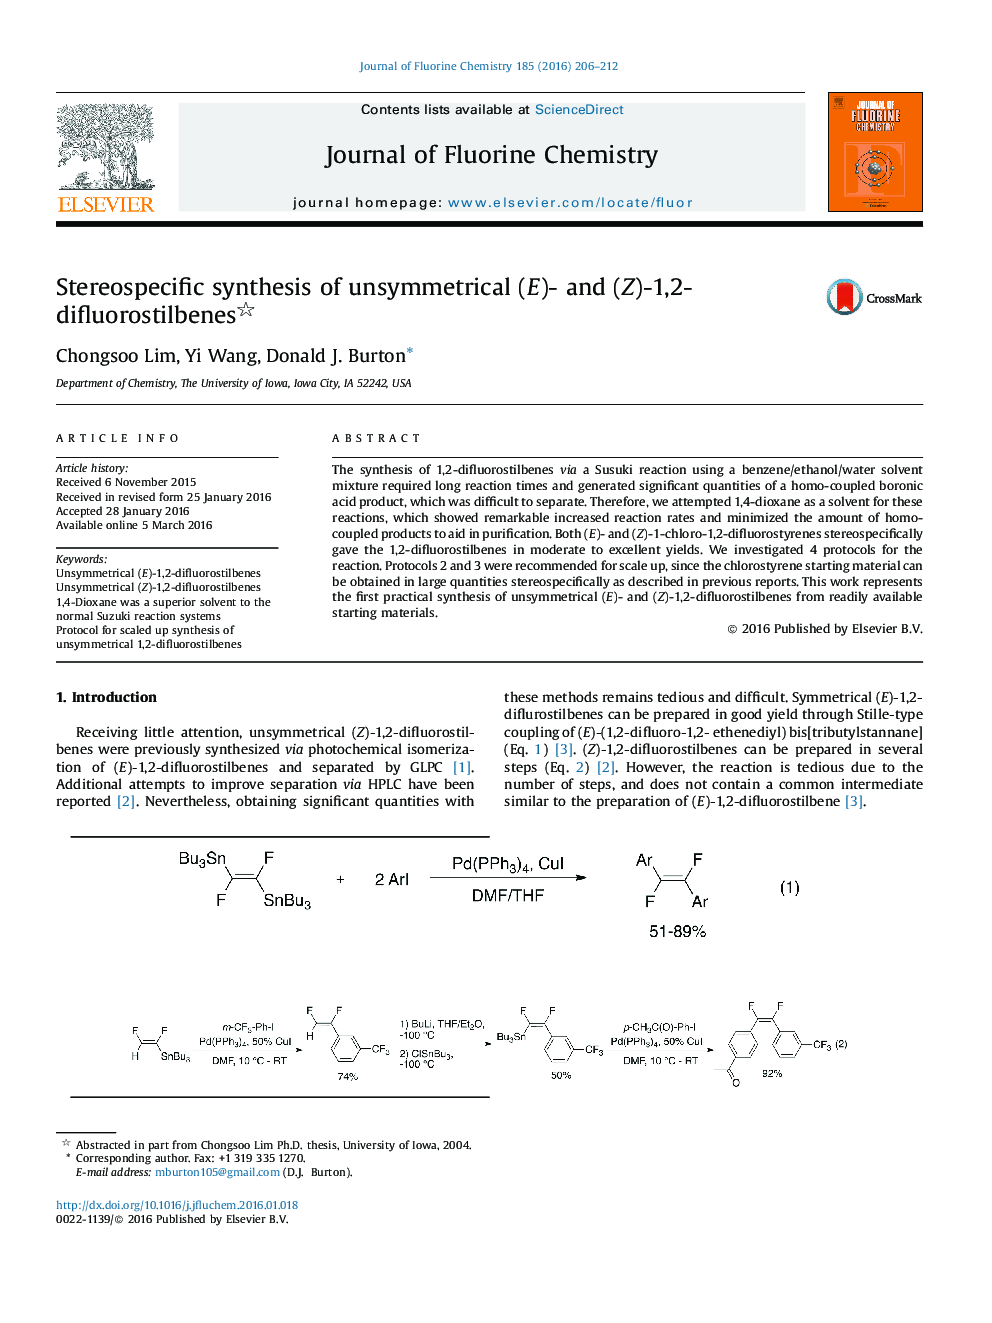 Stereospecific synthesis of unsymmetrical (E)- and (Z)-1,2-difluorostilbenes 